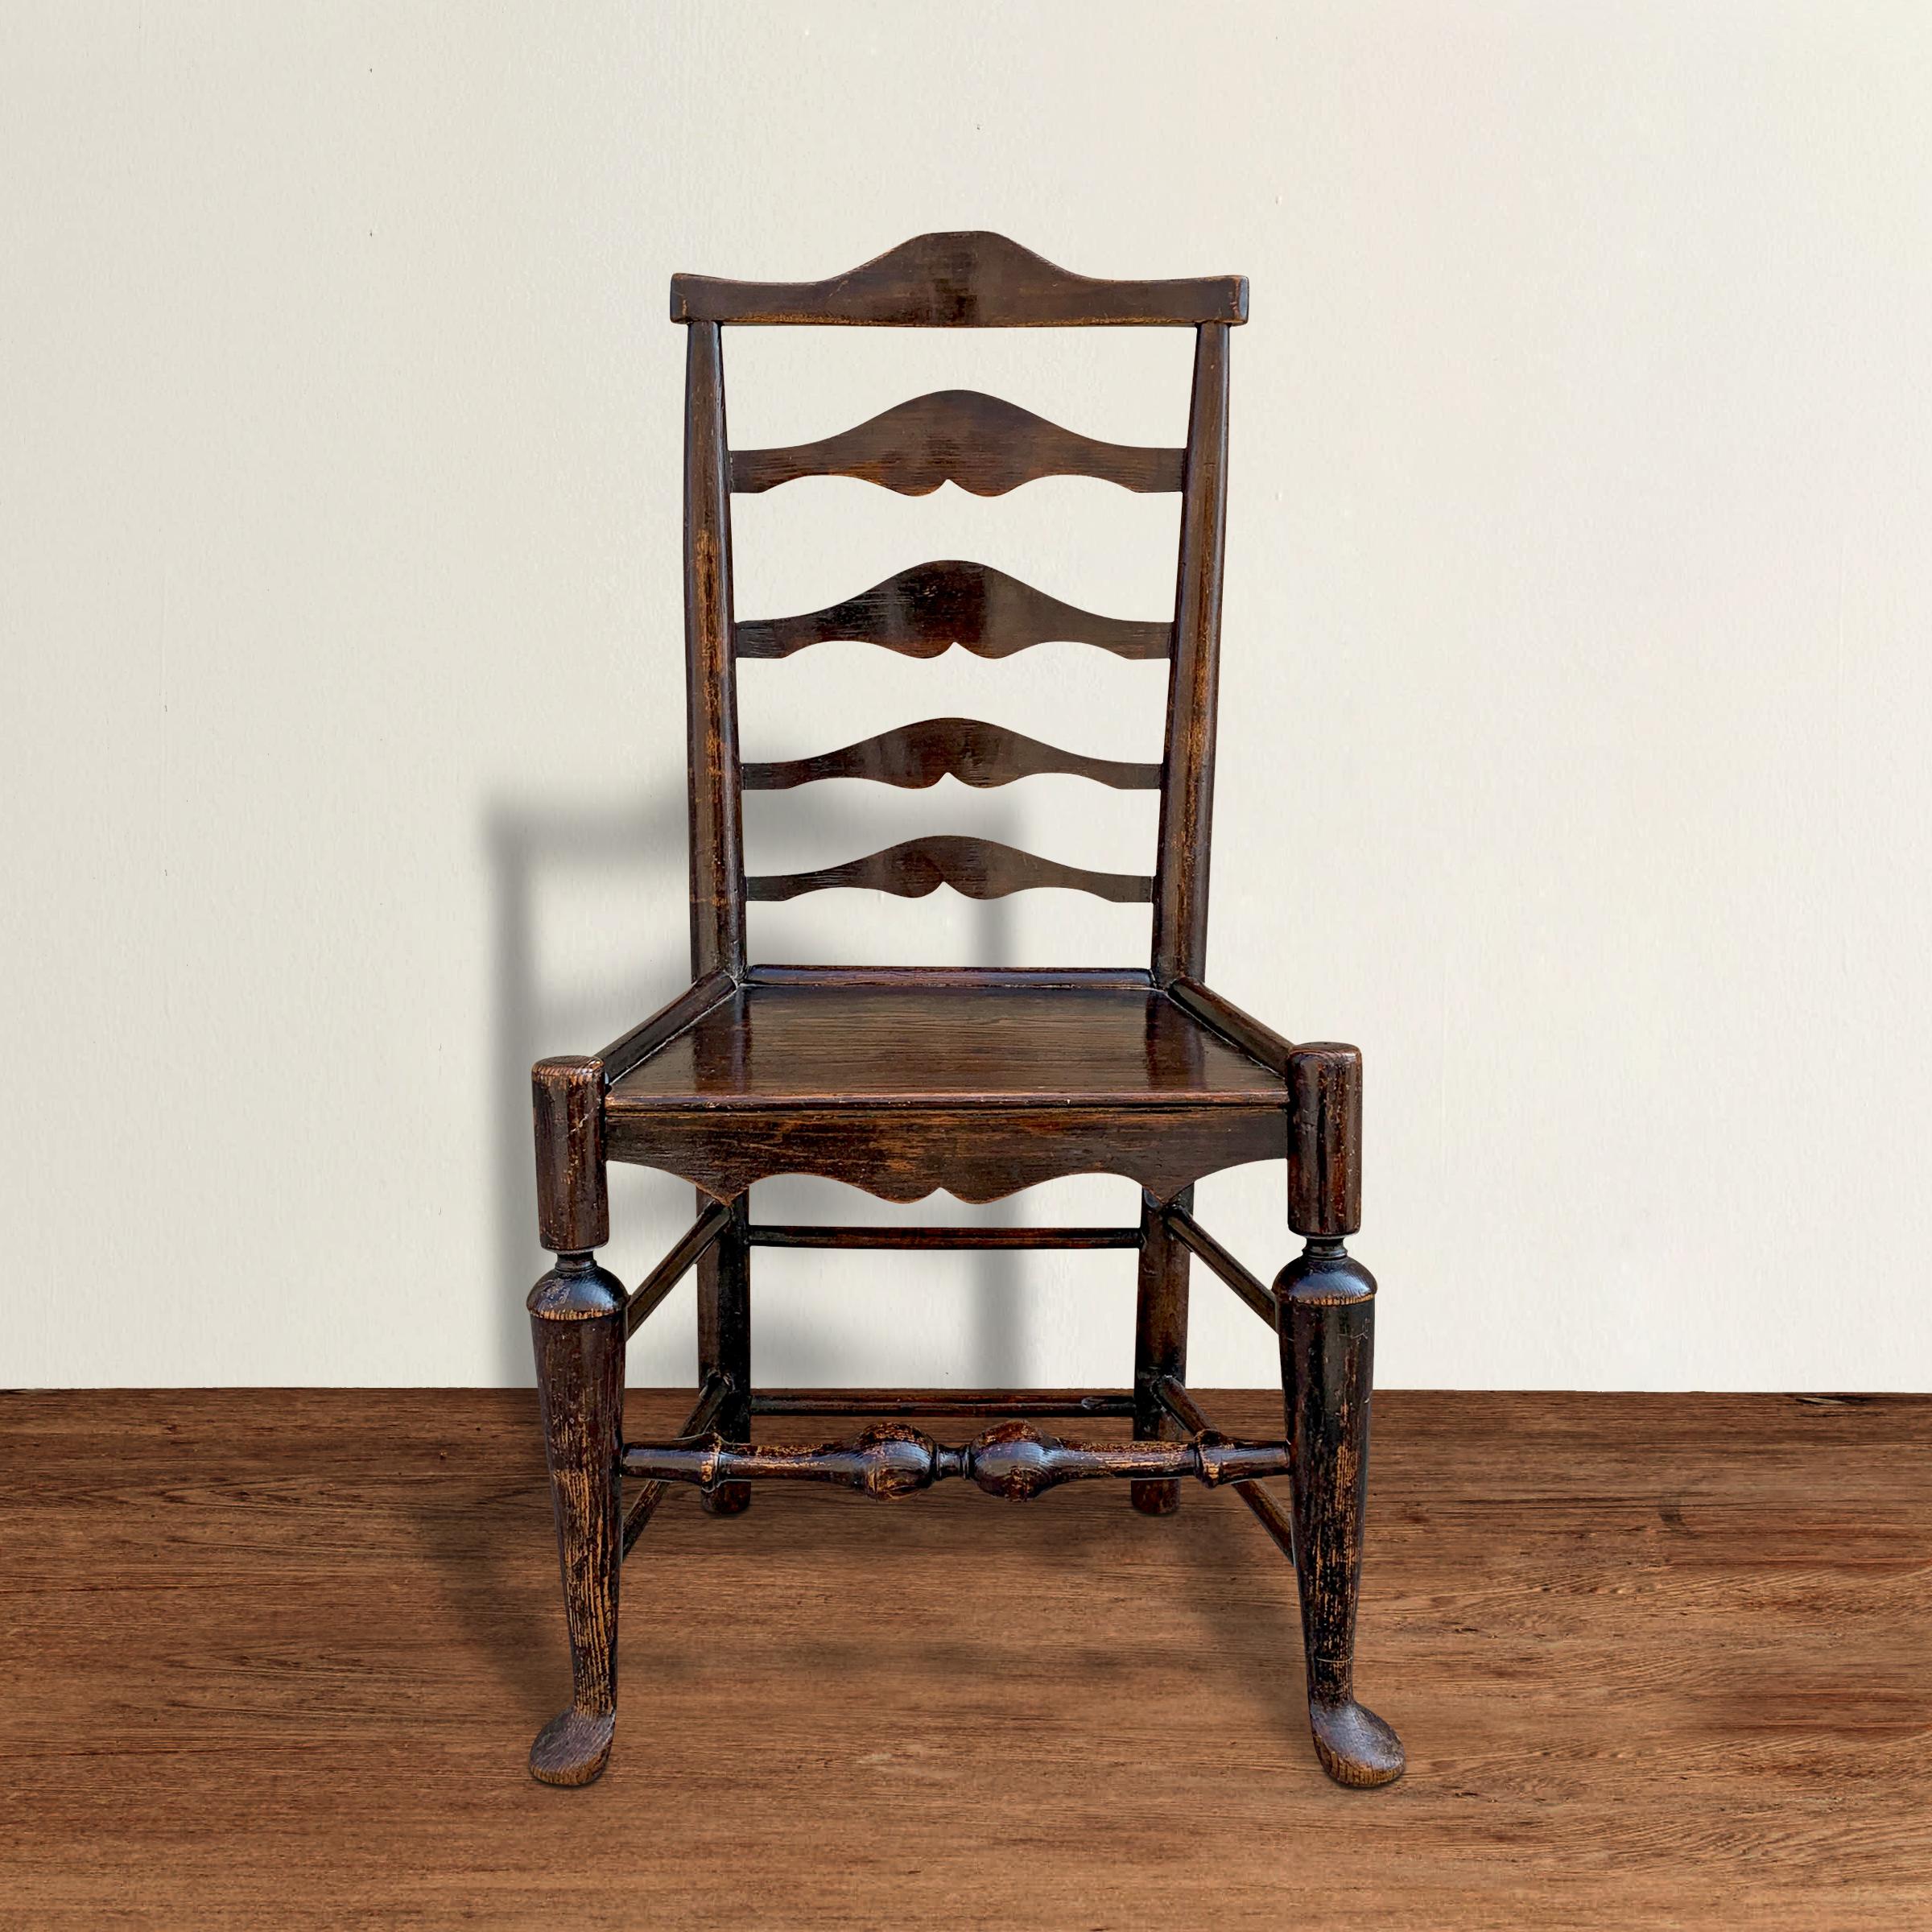 A fantastic 18th century English George III ladder-back oak side chair with beautiful details including curved backsplats, a solid plank seat, trumpet turned legs ending in out-turned pad feet, and a beautiful worn turned stretcher in the front. The